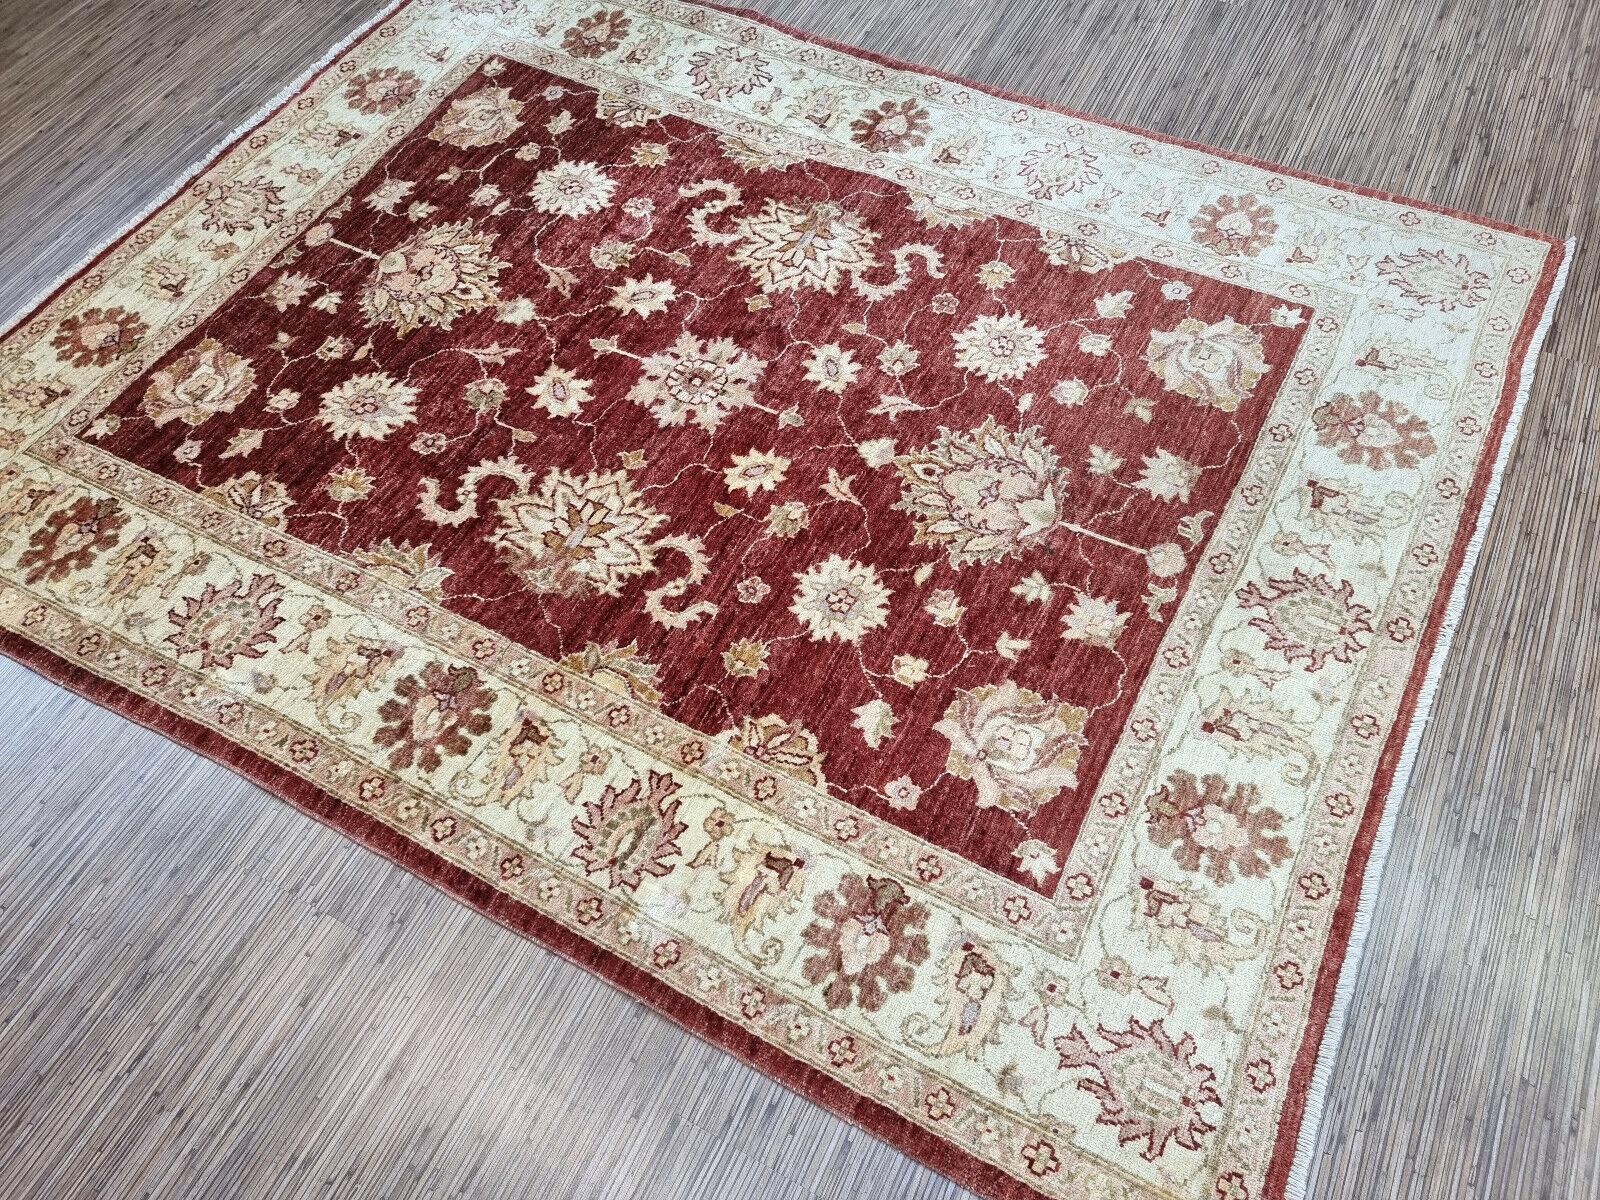 Bring home a piece of history with this Handmade Vintage Afghan Zigler Rug, a beautiful example of the traditional Afghan rug-making style. This wool rug measures 5.1' x 6.4' (156cm x 196cm) and is in good condition, featuring intricate patterns and